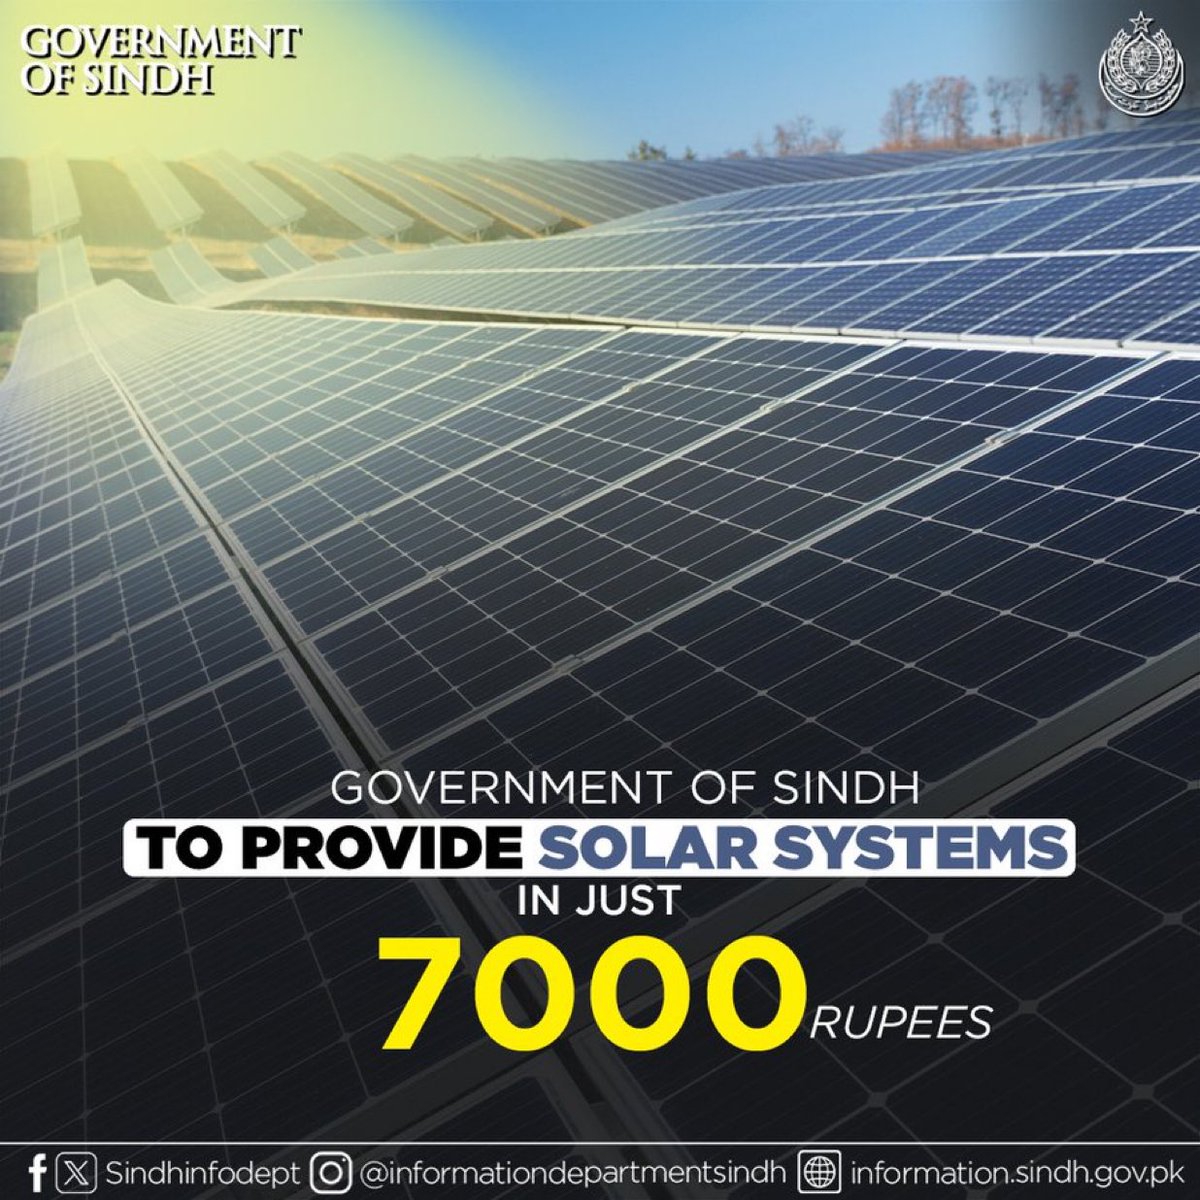 The Sindh govt has launched a remarkable initiative to provide solar systems to the public at a subsidized price of Rs. 7,000-10,000. This move aims to address the electricity crisis, offer relief to citizens, and promote environmental protection through green energy. #SindhGovt